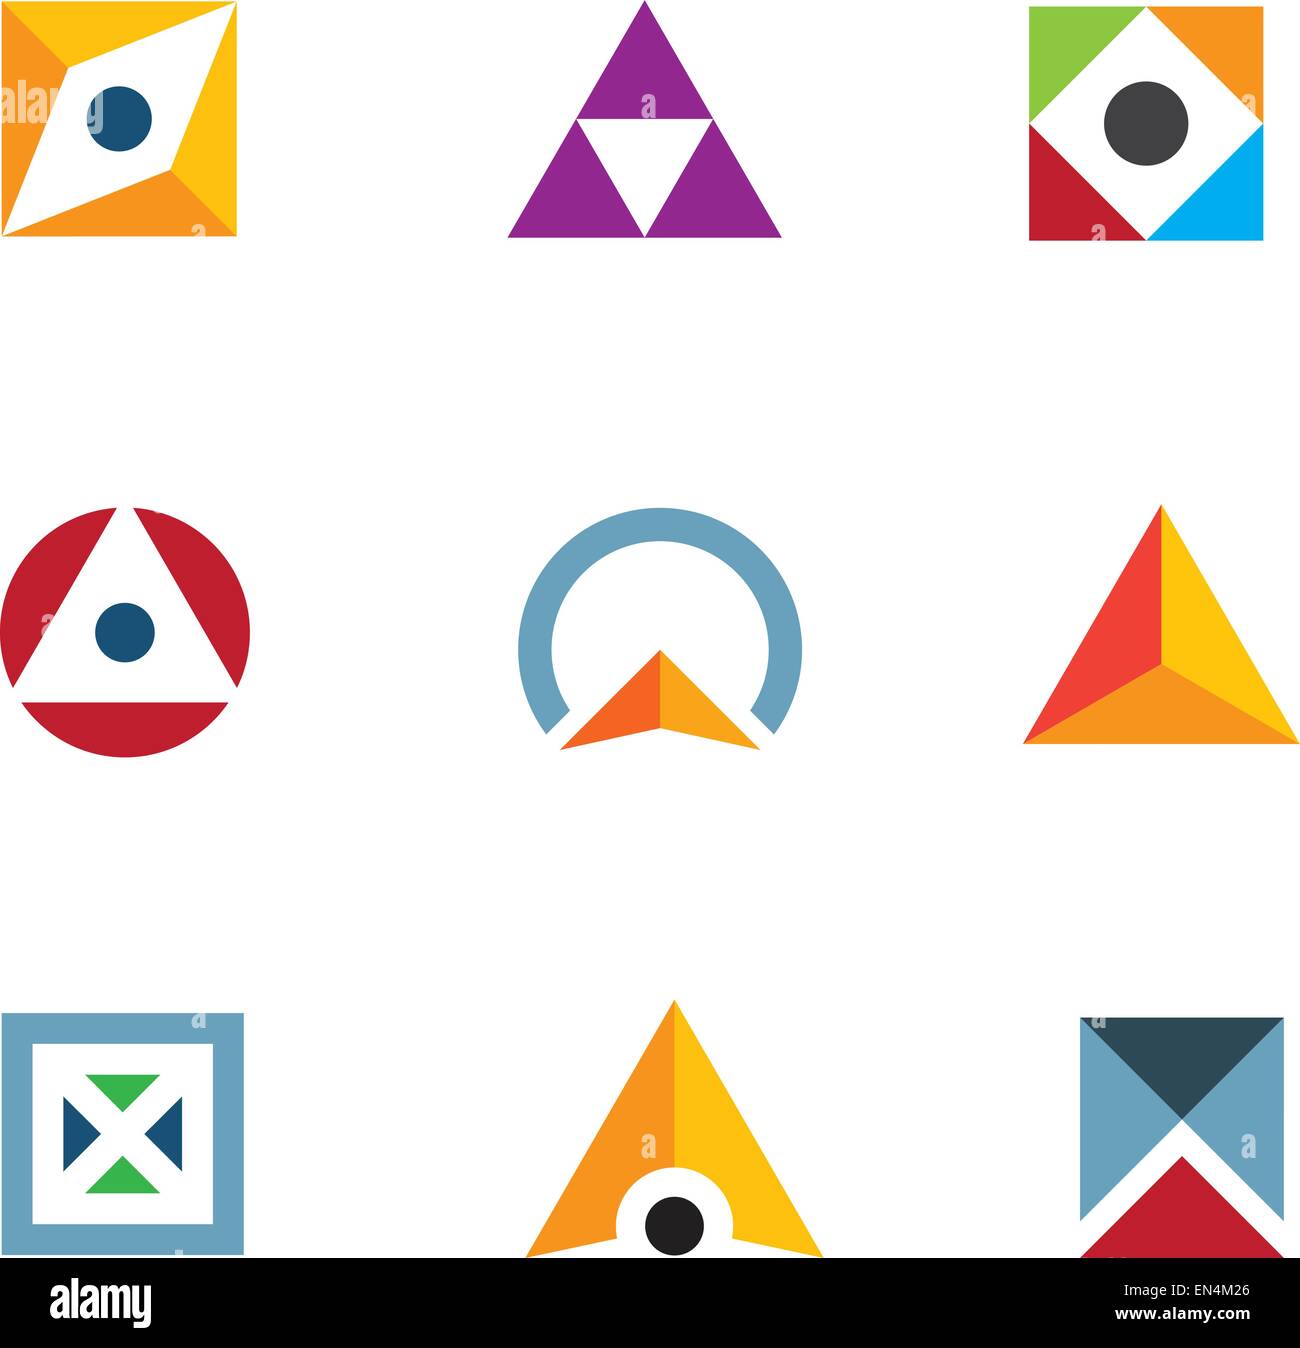 Geometric shape triangle circle and cube inspiring combination logo icon Stock Vector